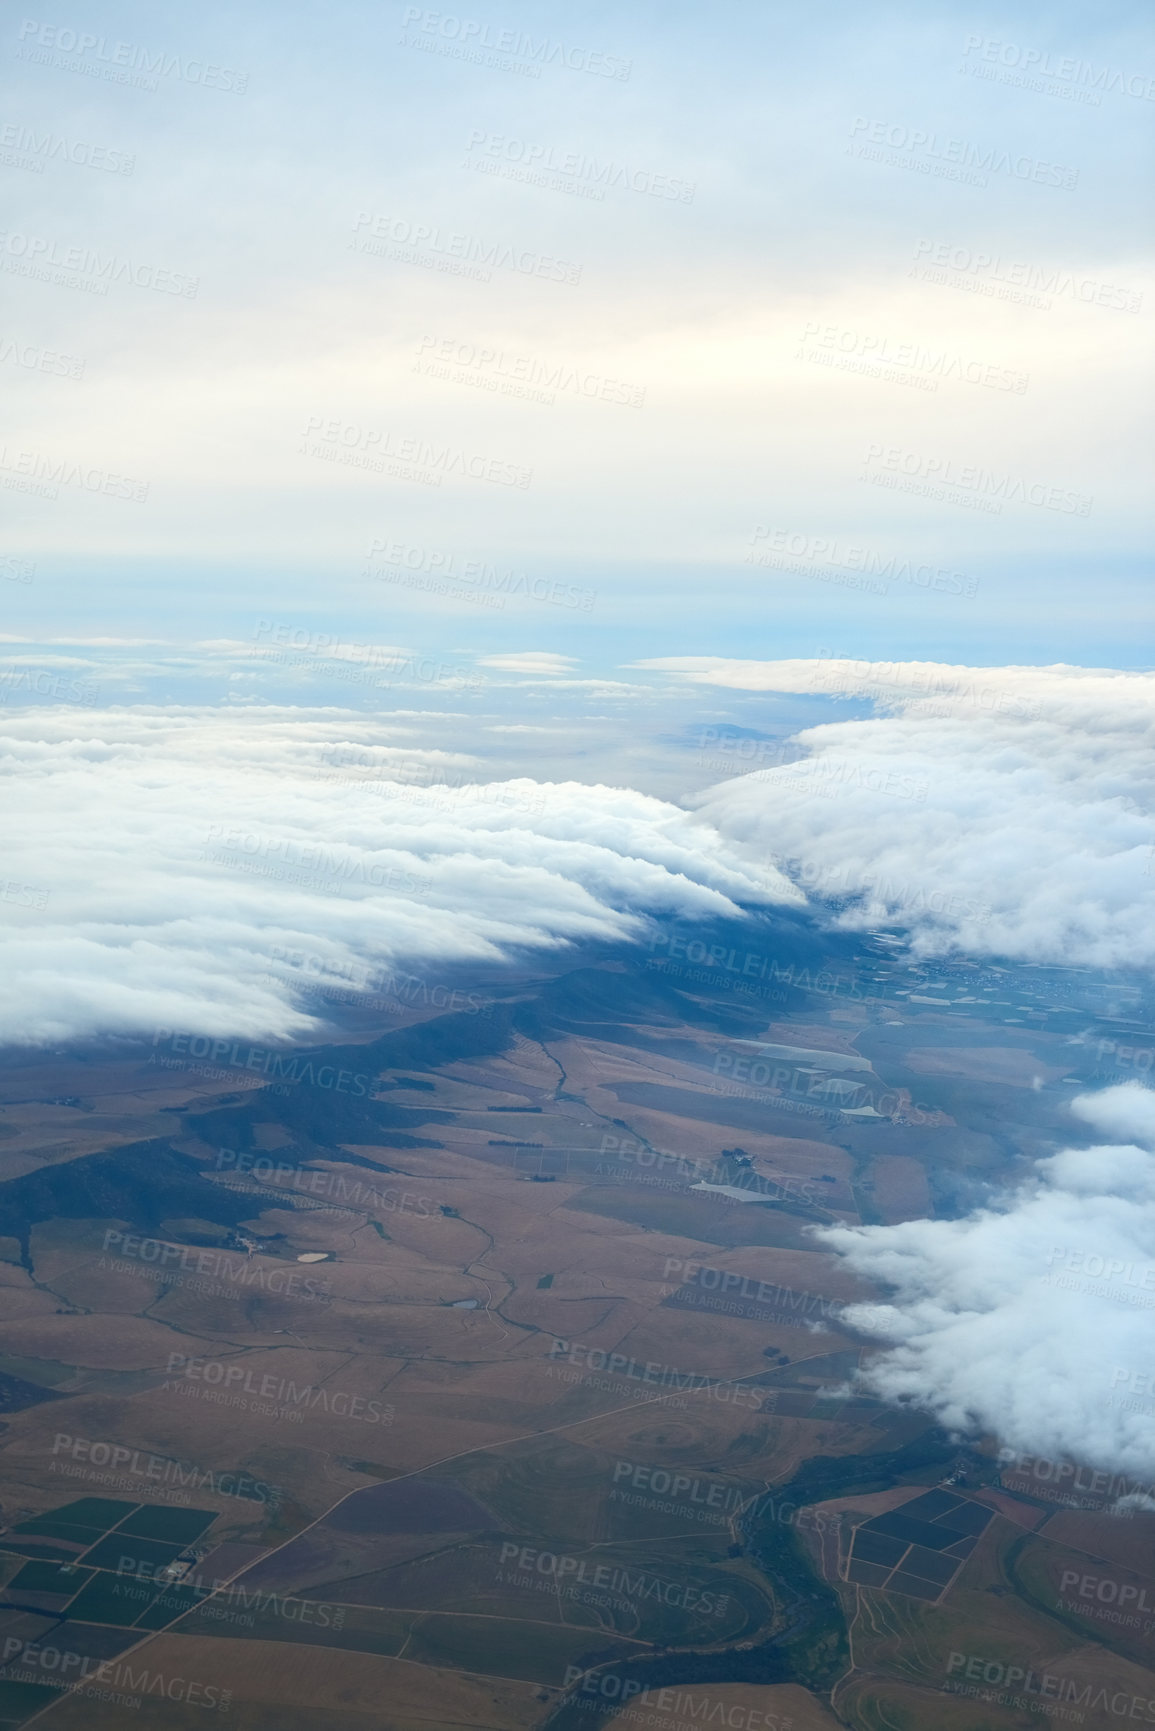 Buy stock photo Shot of a cloudy view seen from an airplane window